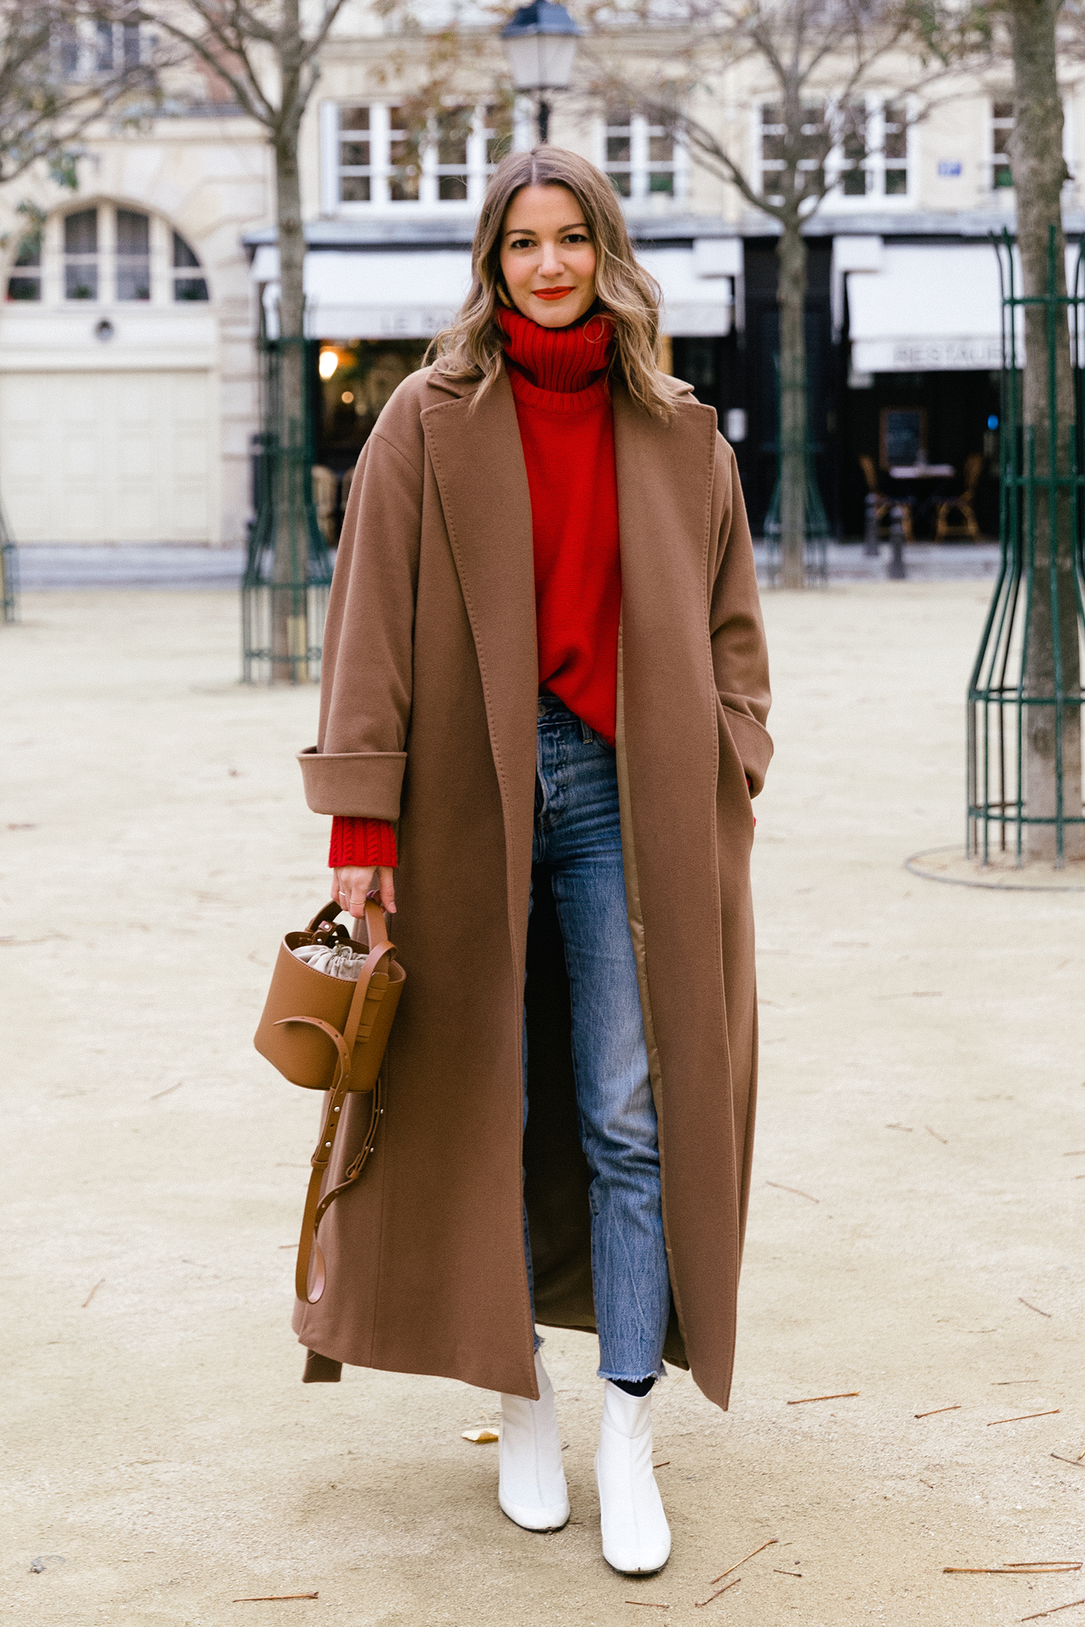 This Stylish Outfit Idea Is Perfect for the Holidays